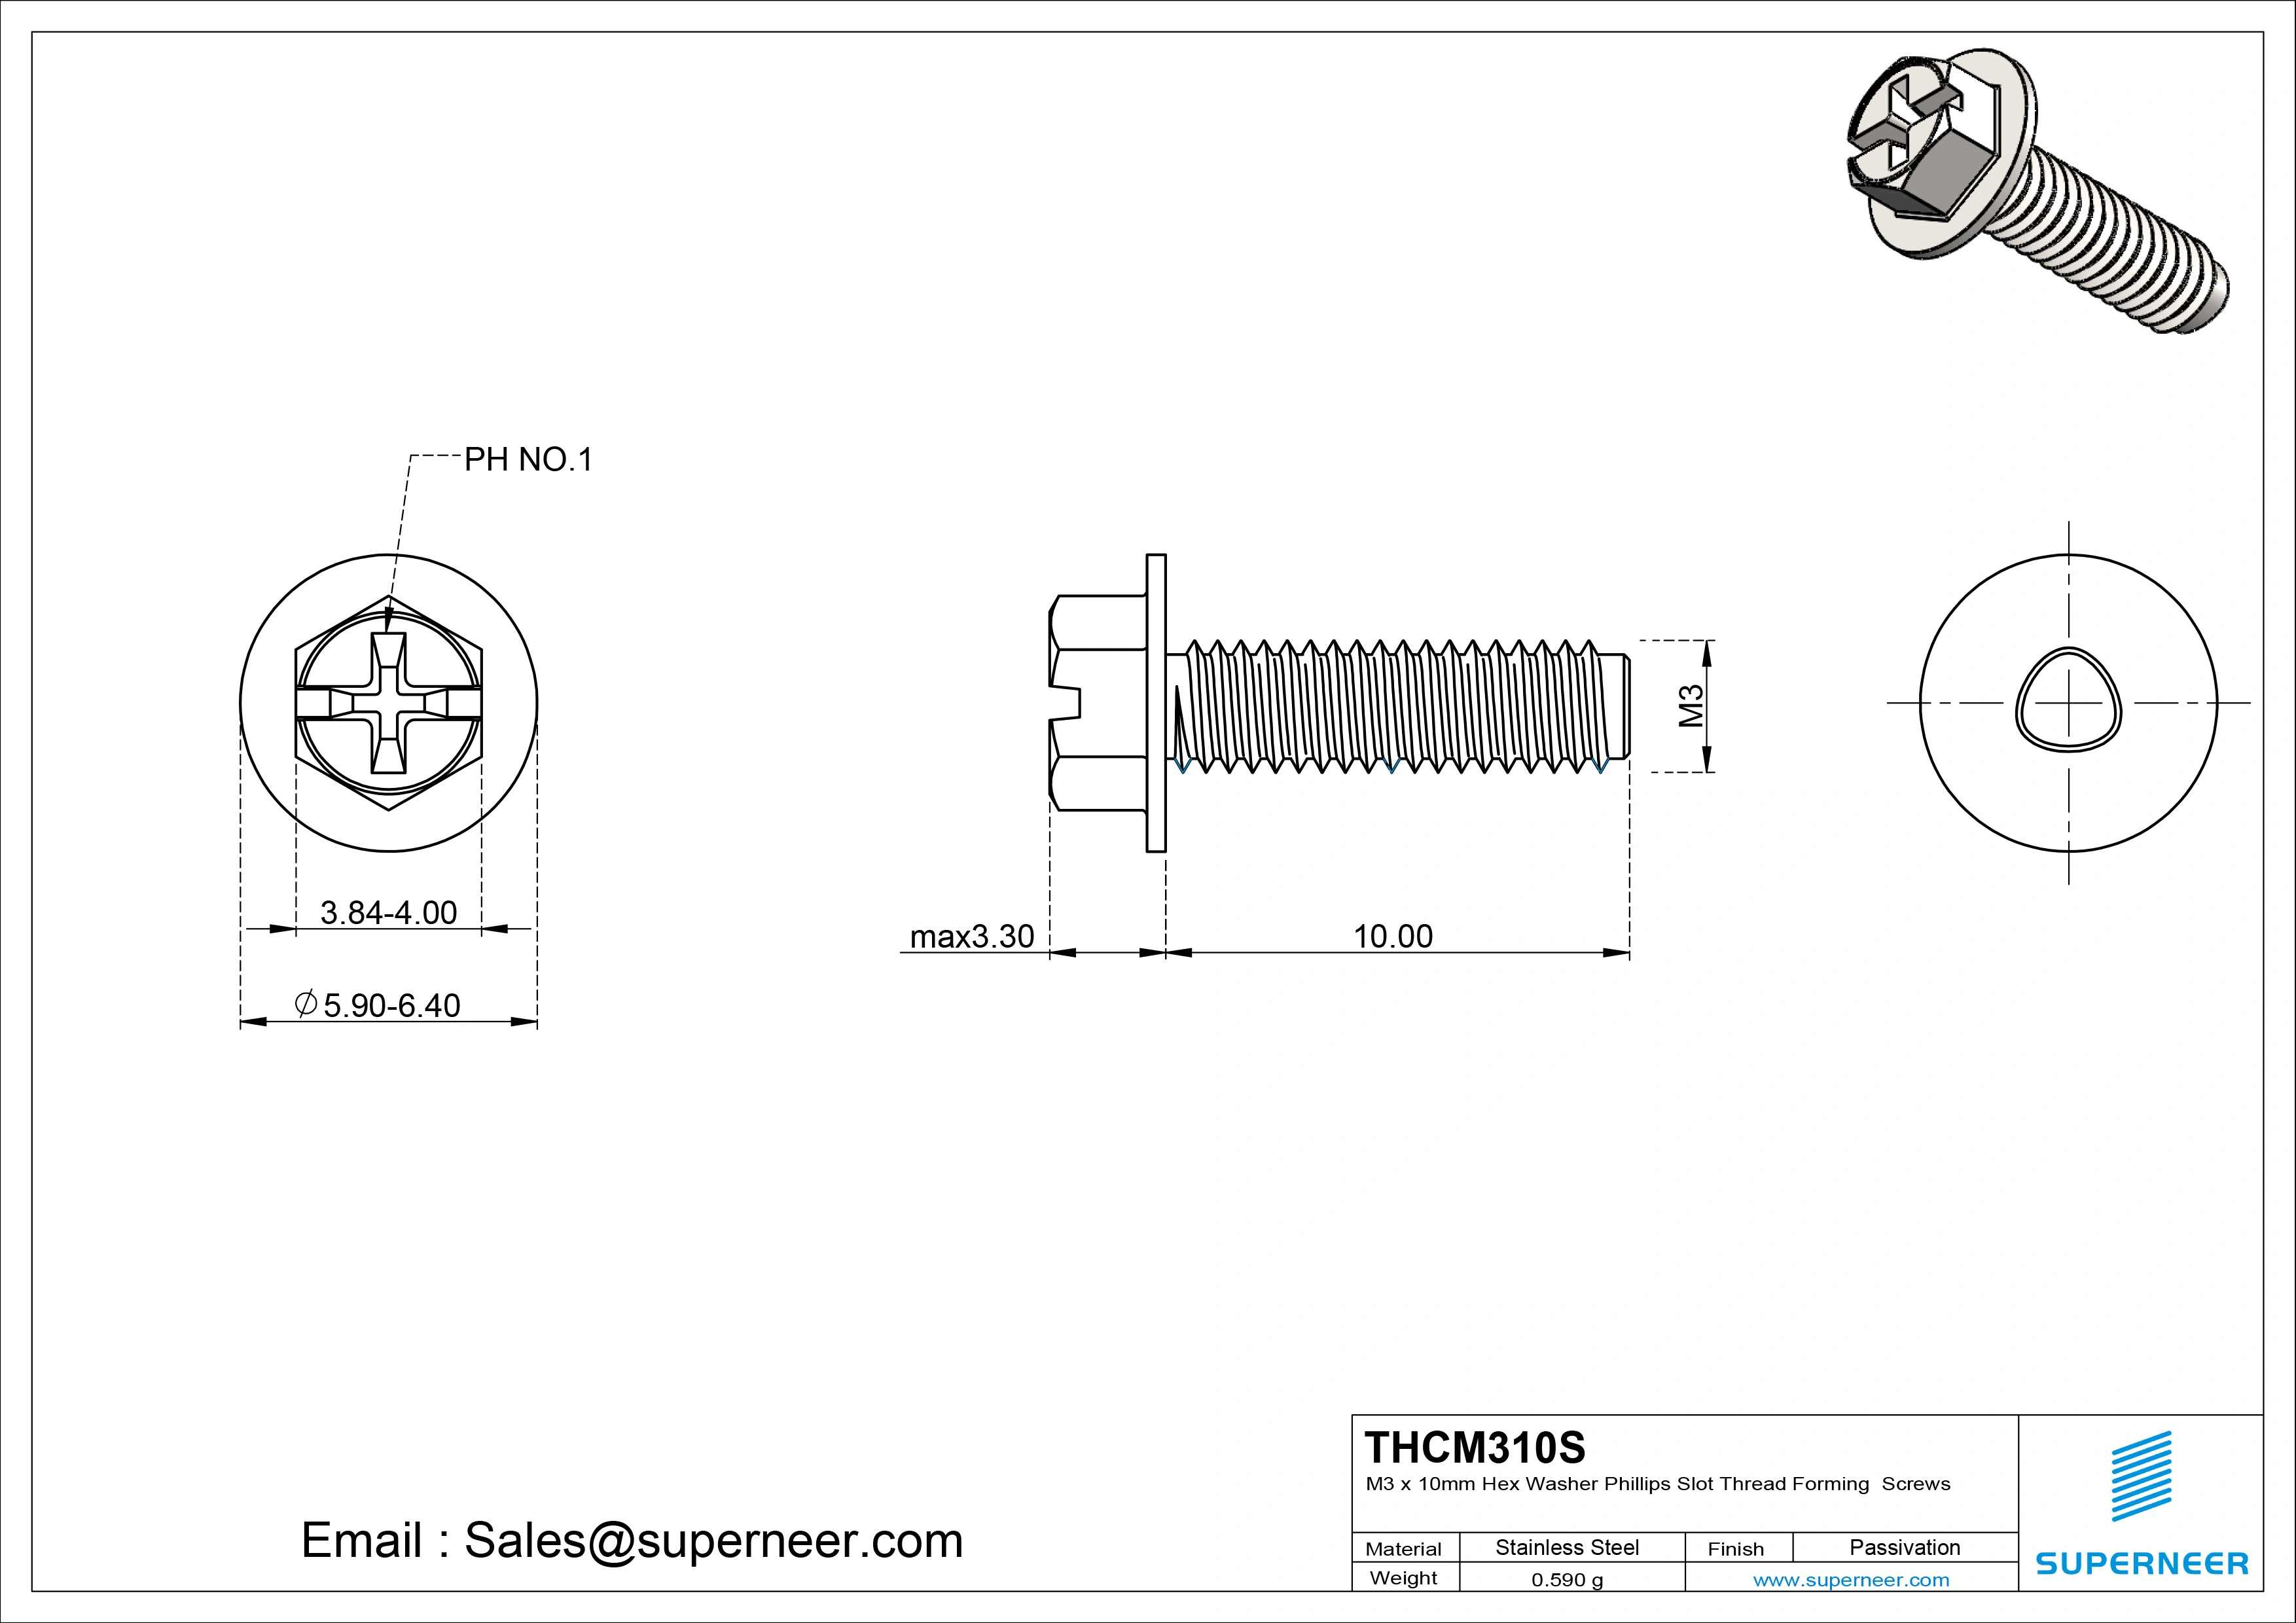 M3 × 10mm Indented Hex Washer Phillips Slot Thread Forming Screws for Metal SUS304 Stainless Steel Inox